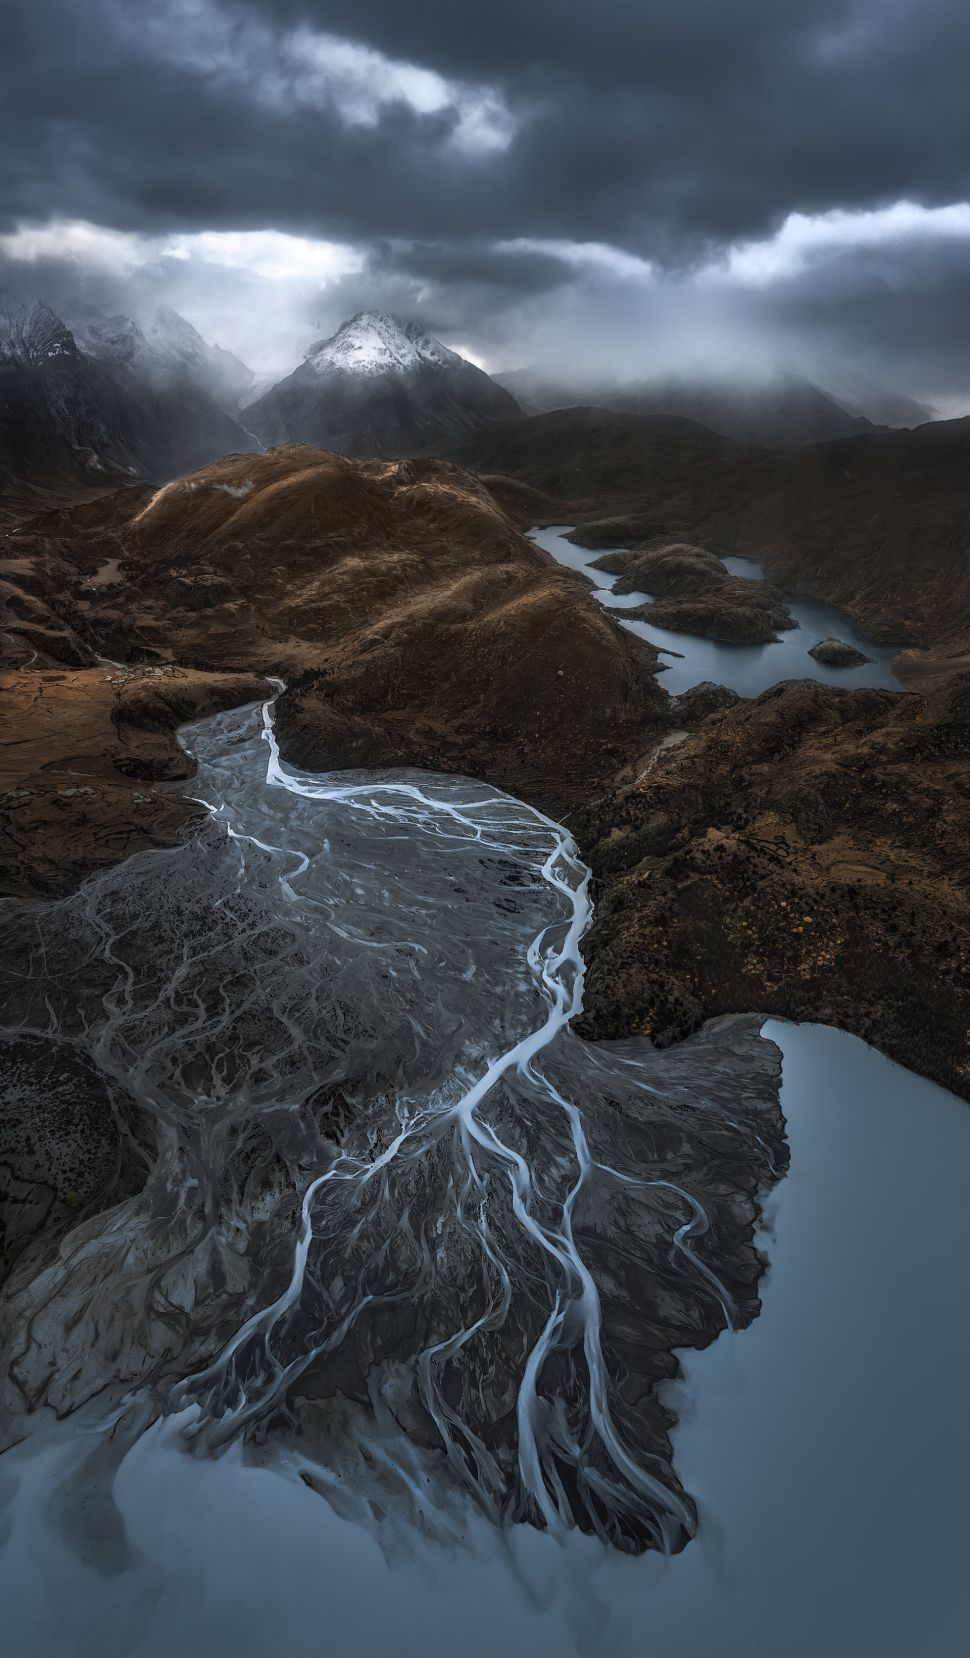 The Source of Landscape, shot on a DJI Air 2S. 1/2500sec at f/3, ISO 100. Image: Mark's Horizon/Skypixel